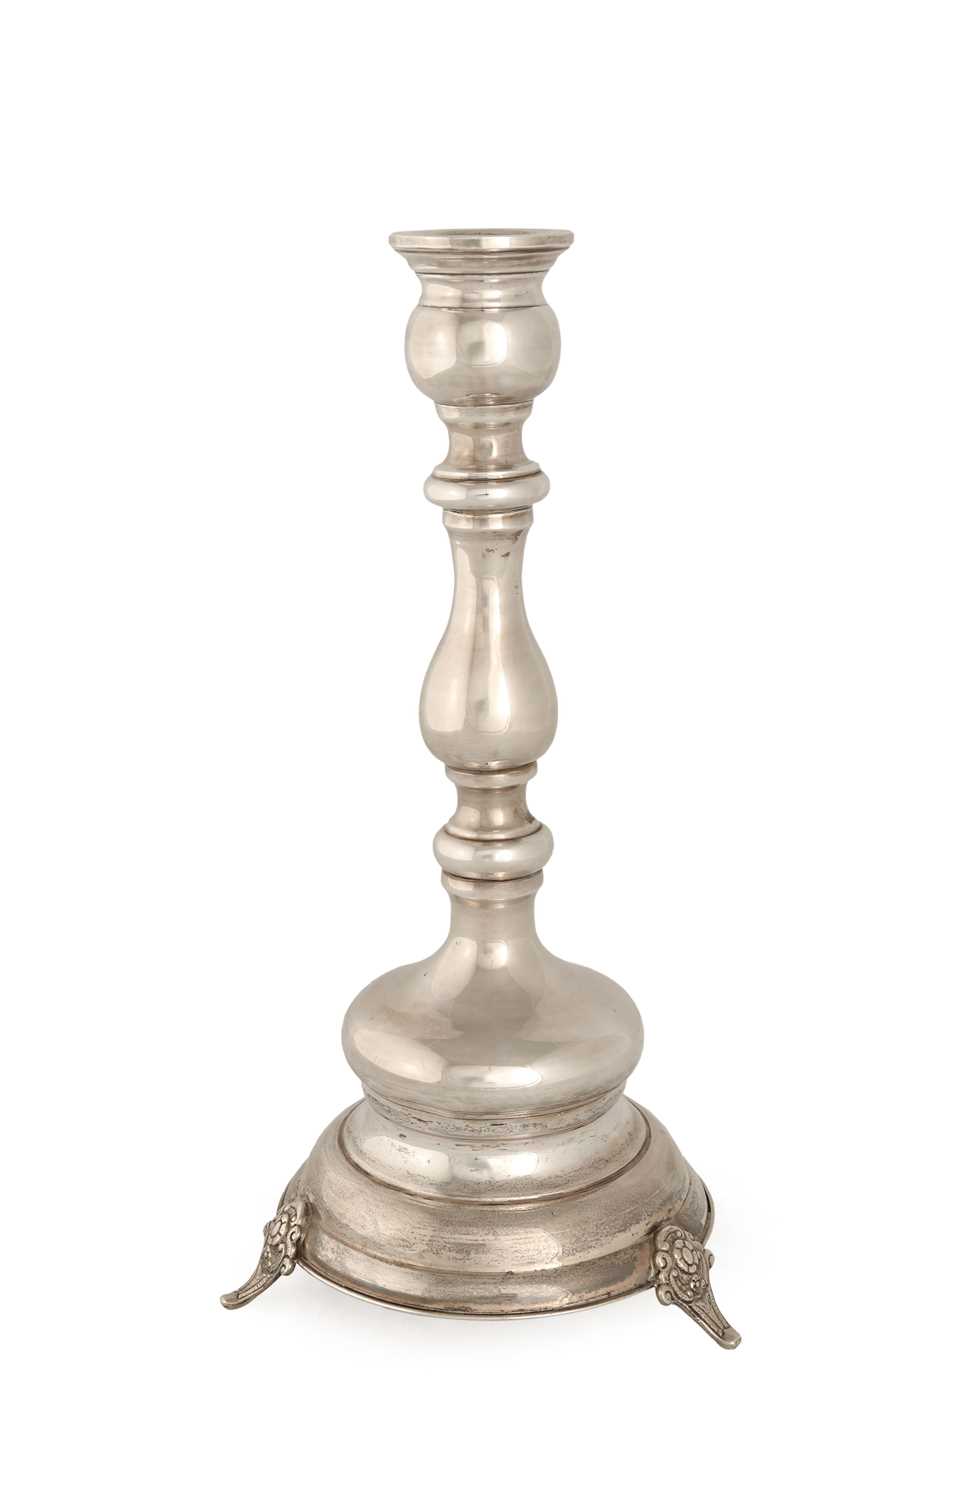 Lot 55 - Silver Candlestick